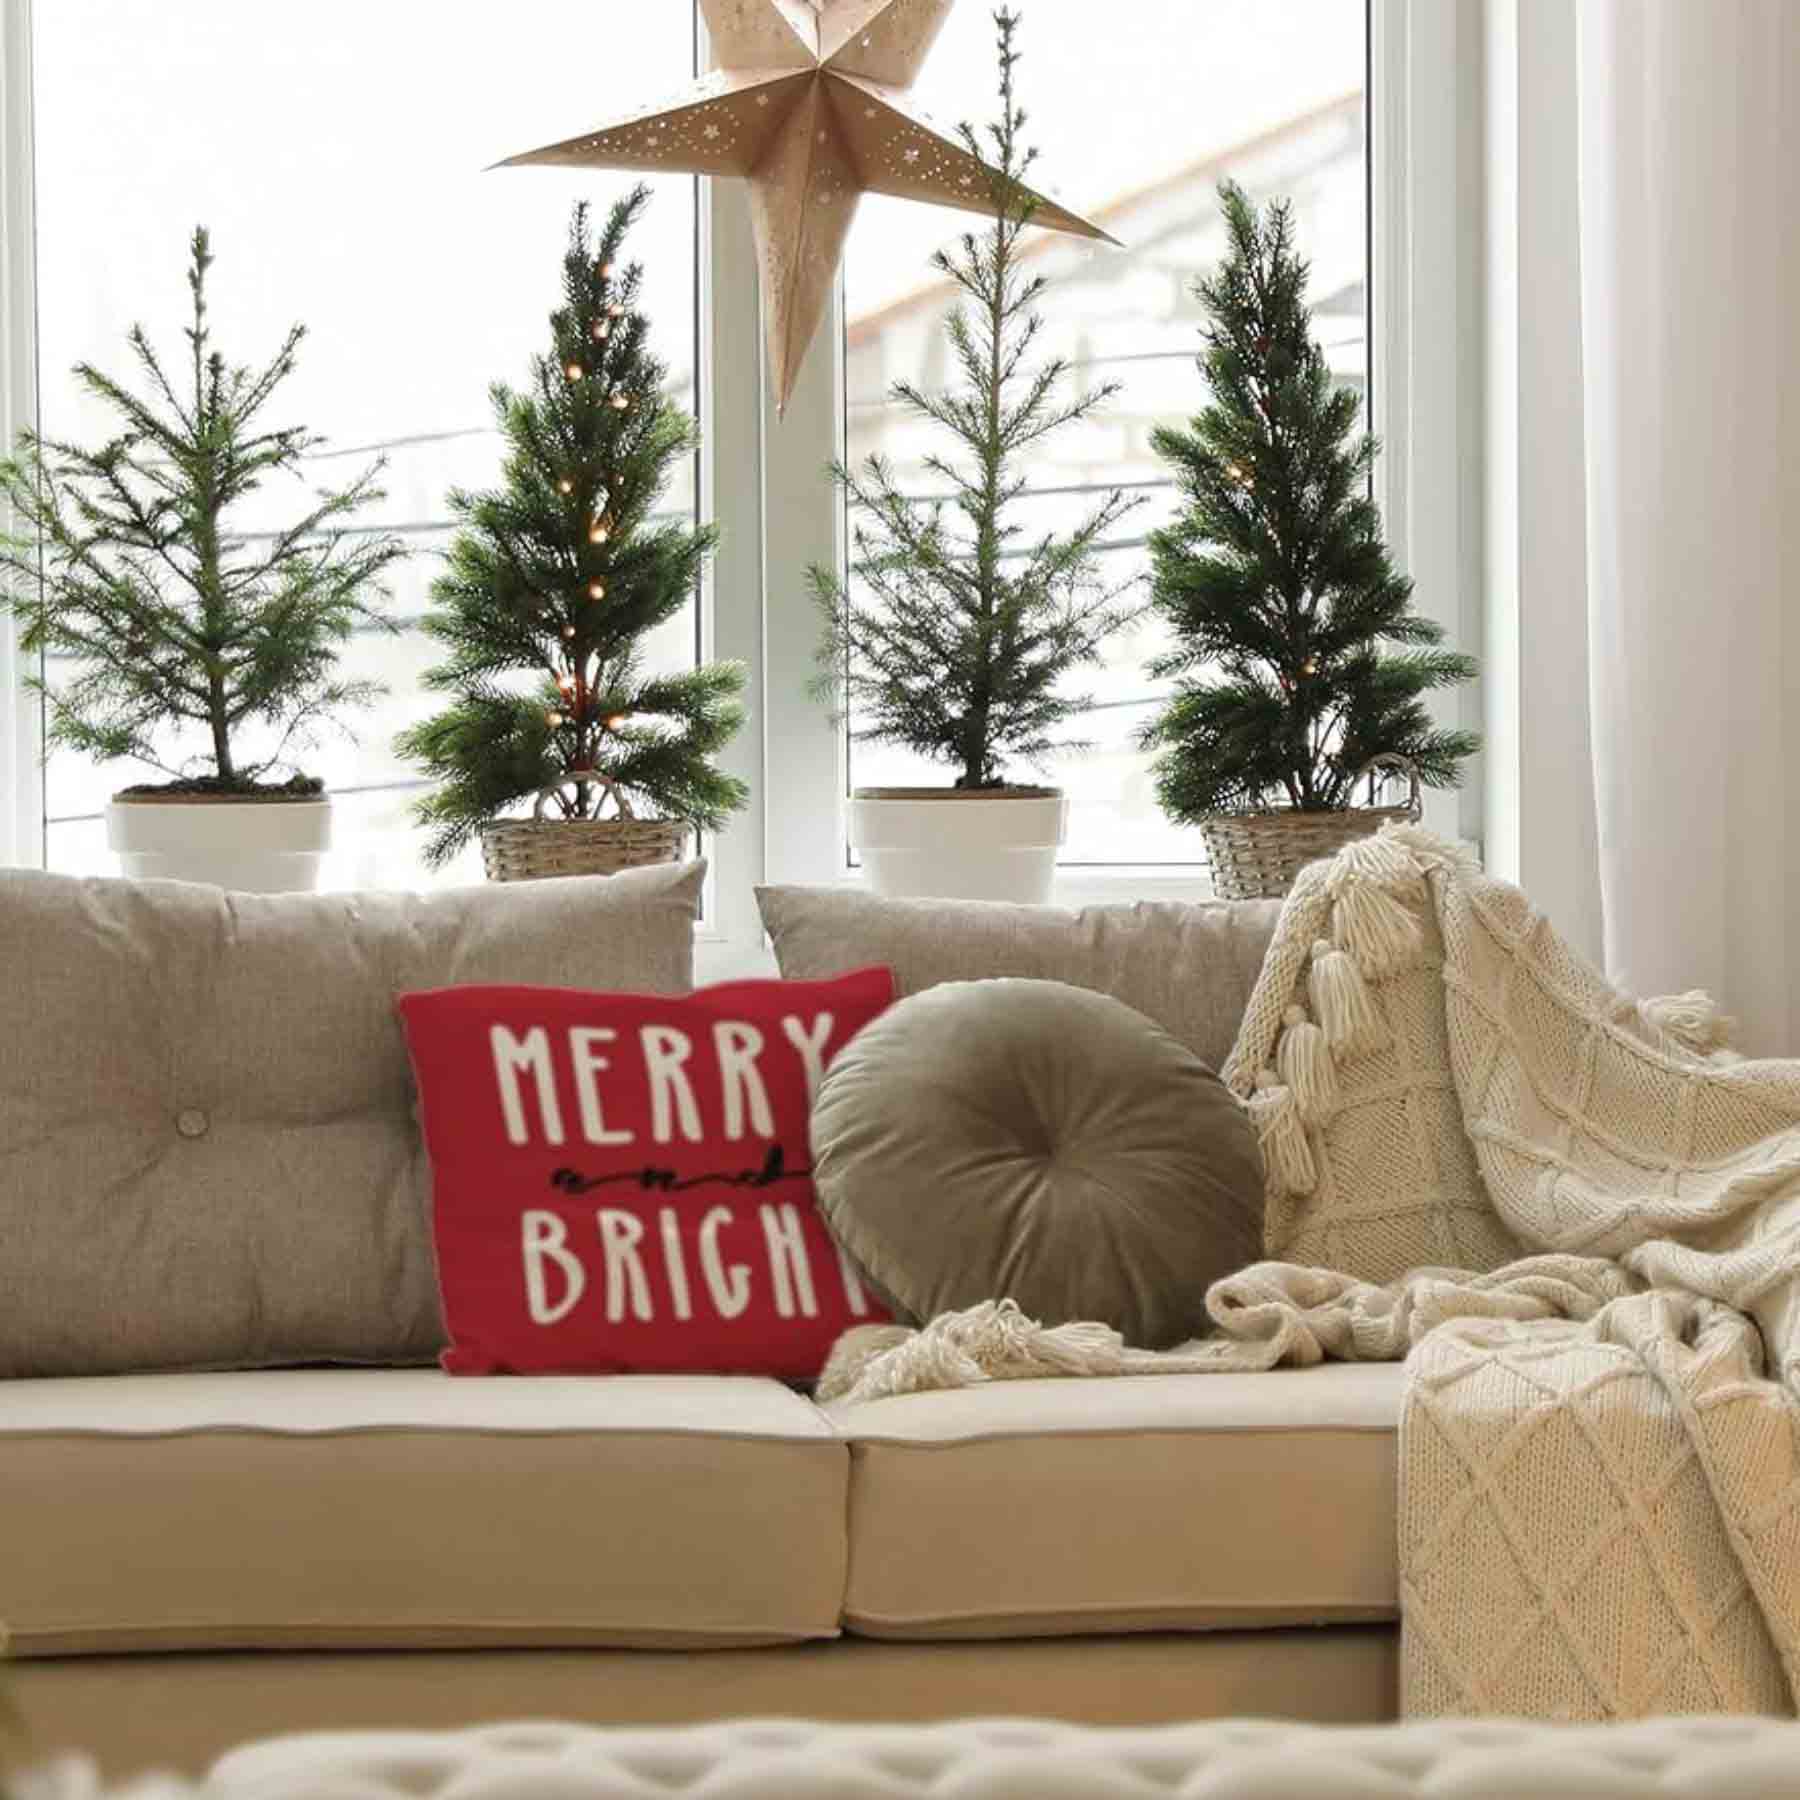 craft festive living room with chosen pillows and blankets